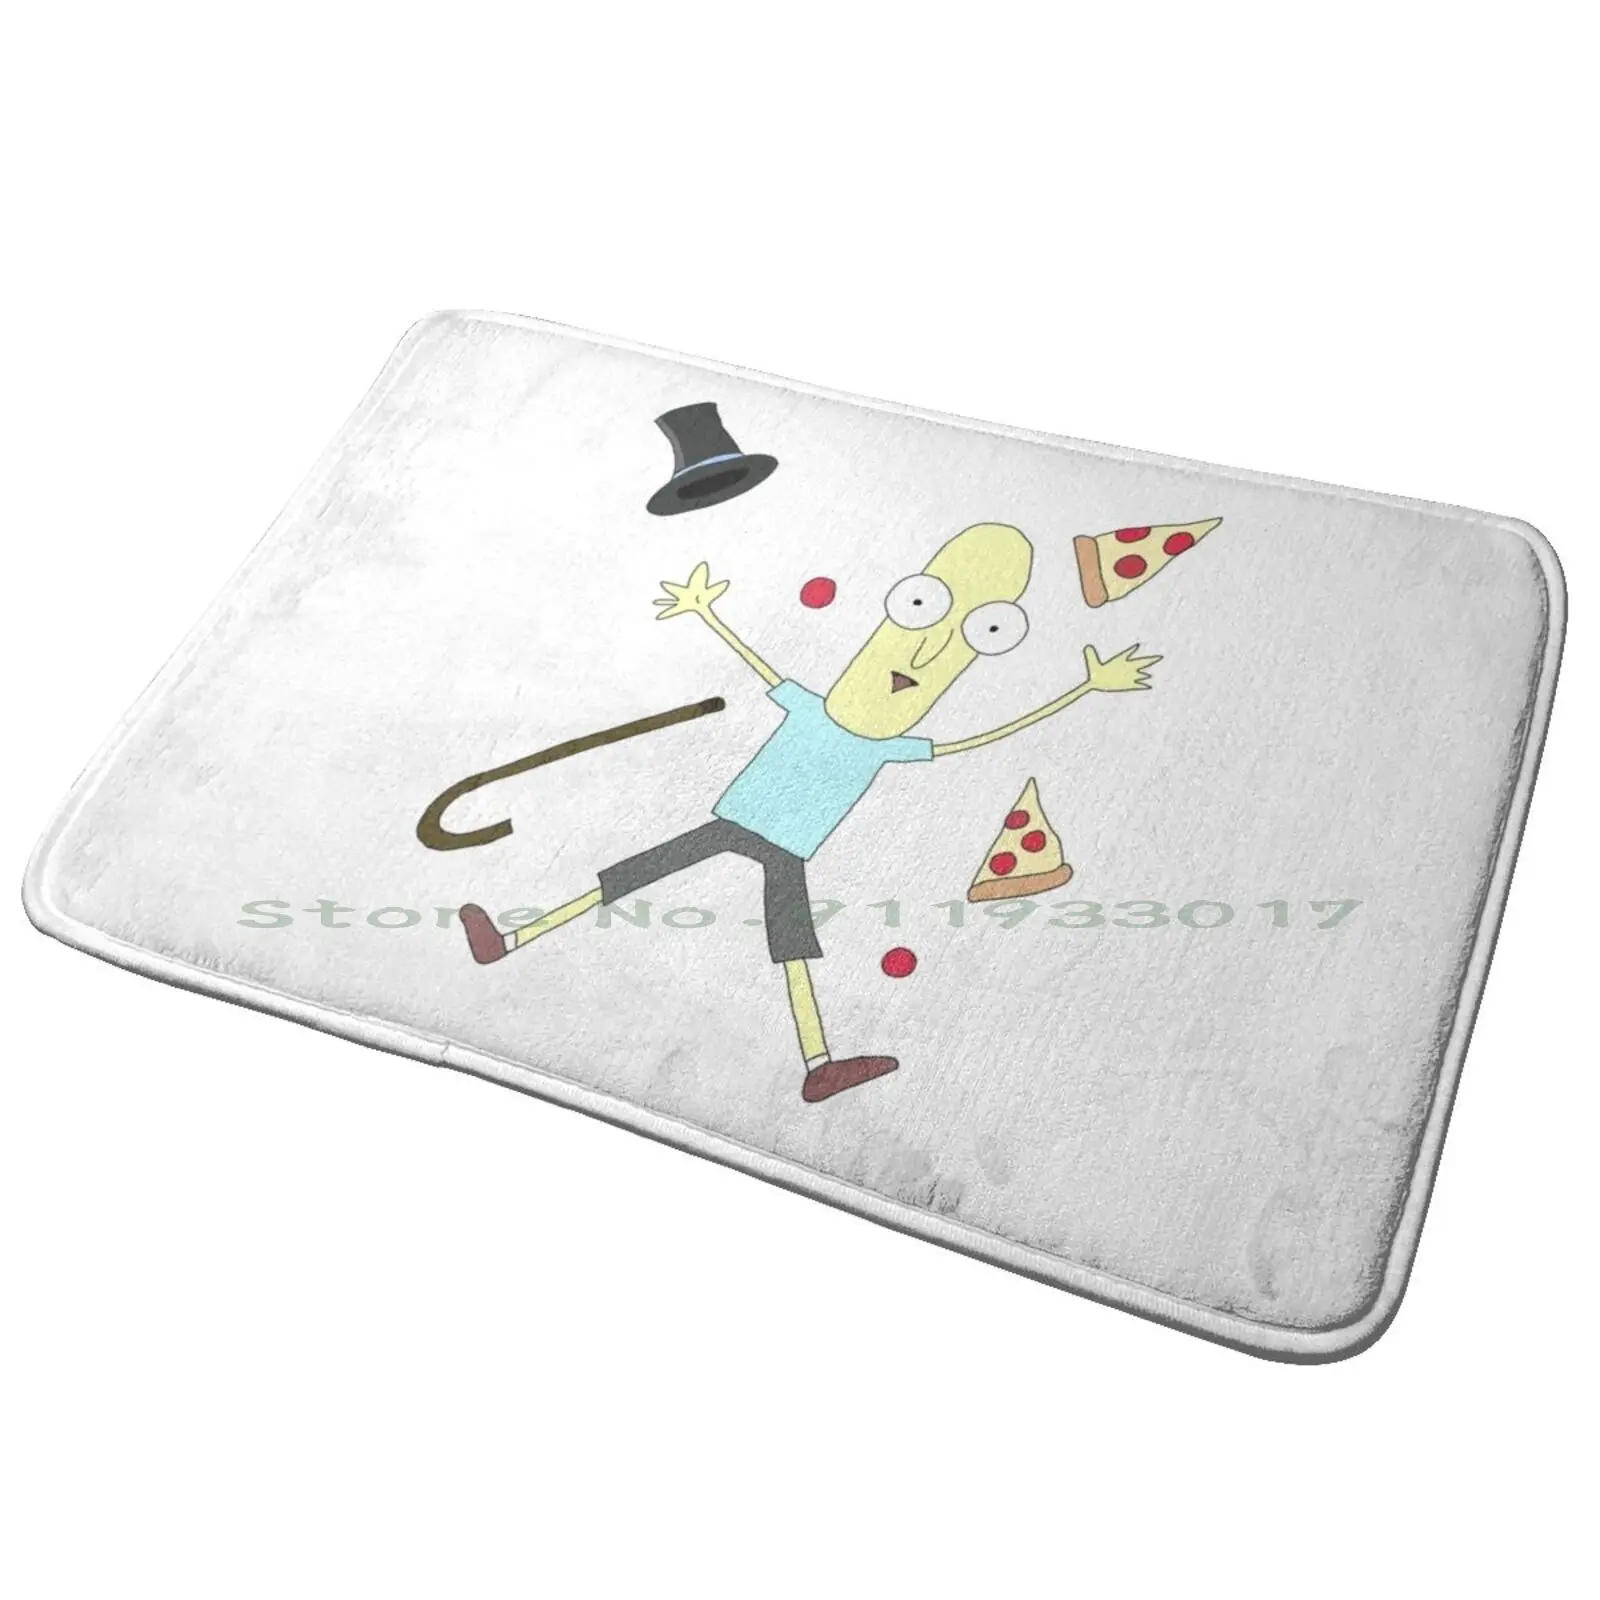 Mr Poopy Butthole Is Waiting For Next Season Fan Art Entrance Door Mat Bath Mat Rug Mr Poopybutthole Pizza Morty Smith Cartoon